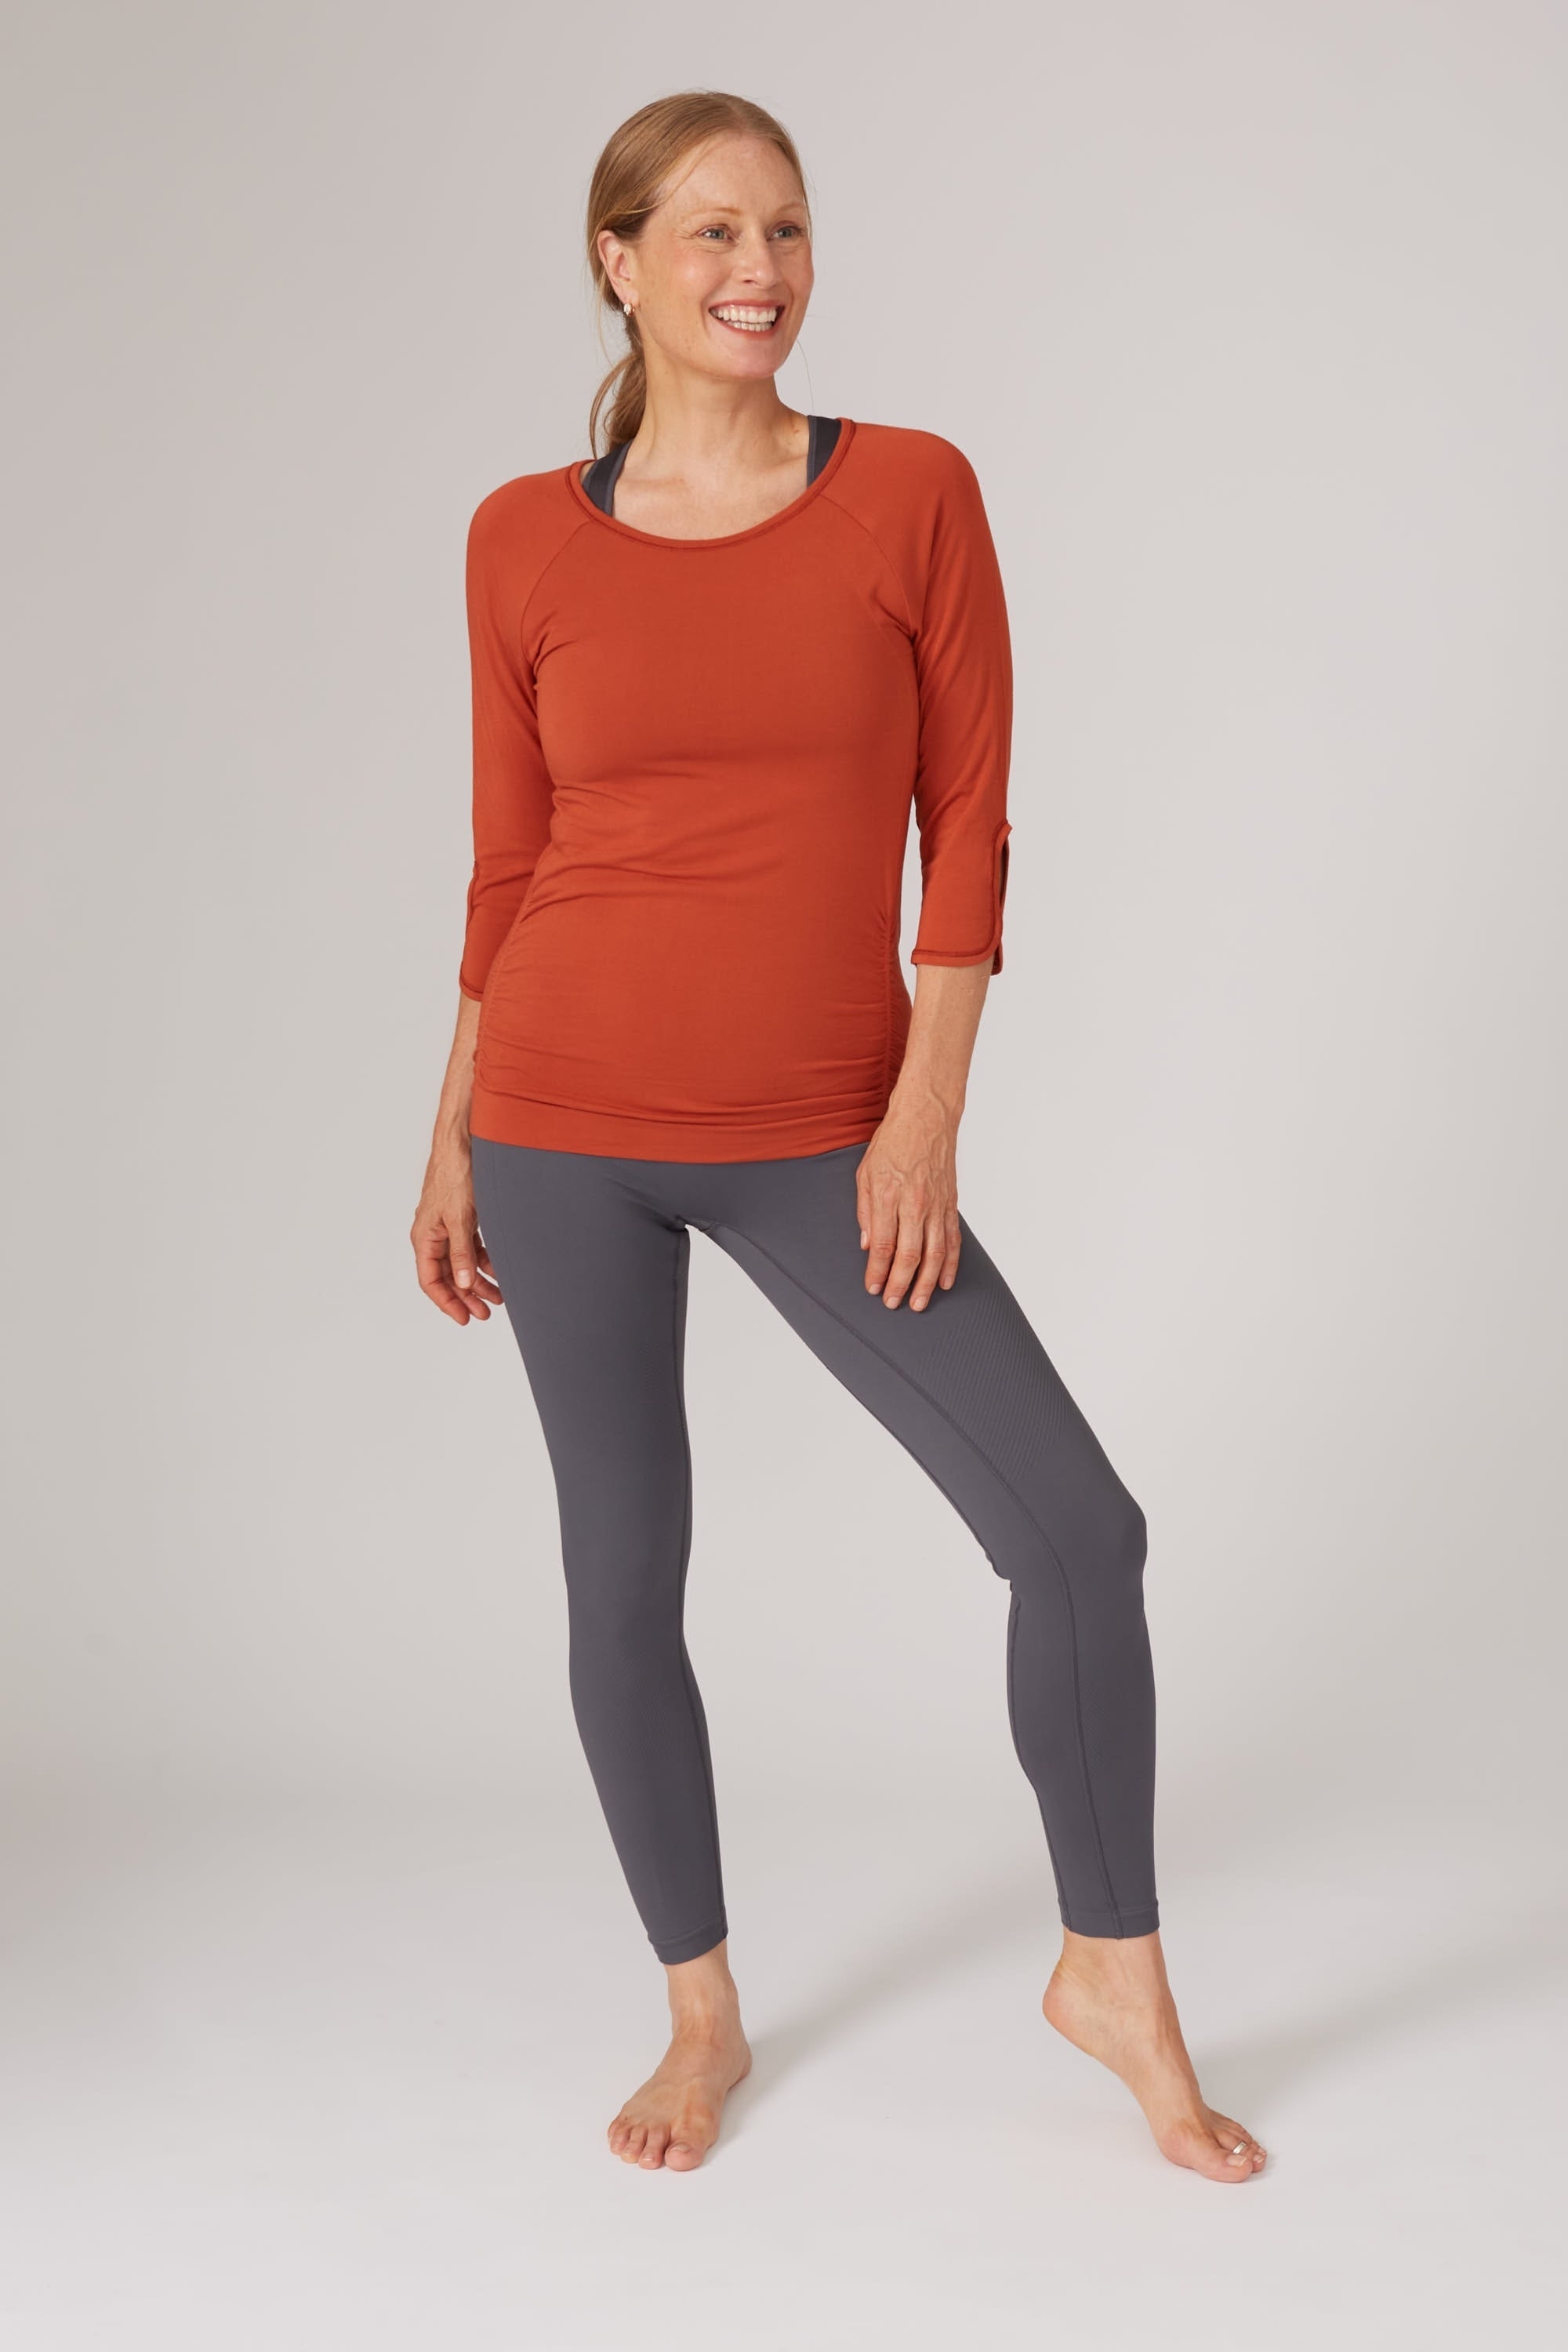 Bright burnt orange bamboo long sleeve top and dark grey leggings for yoga, pilates, barre and running from sustainable activewear brand, Jilla Active